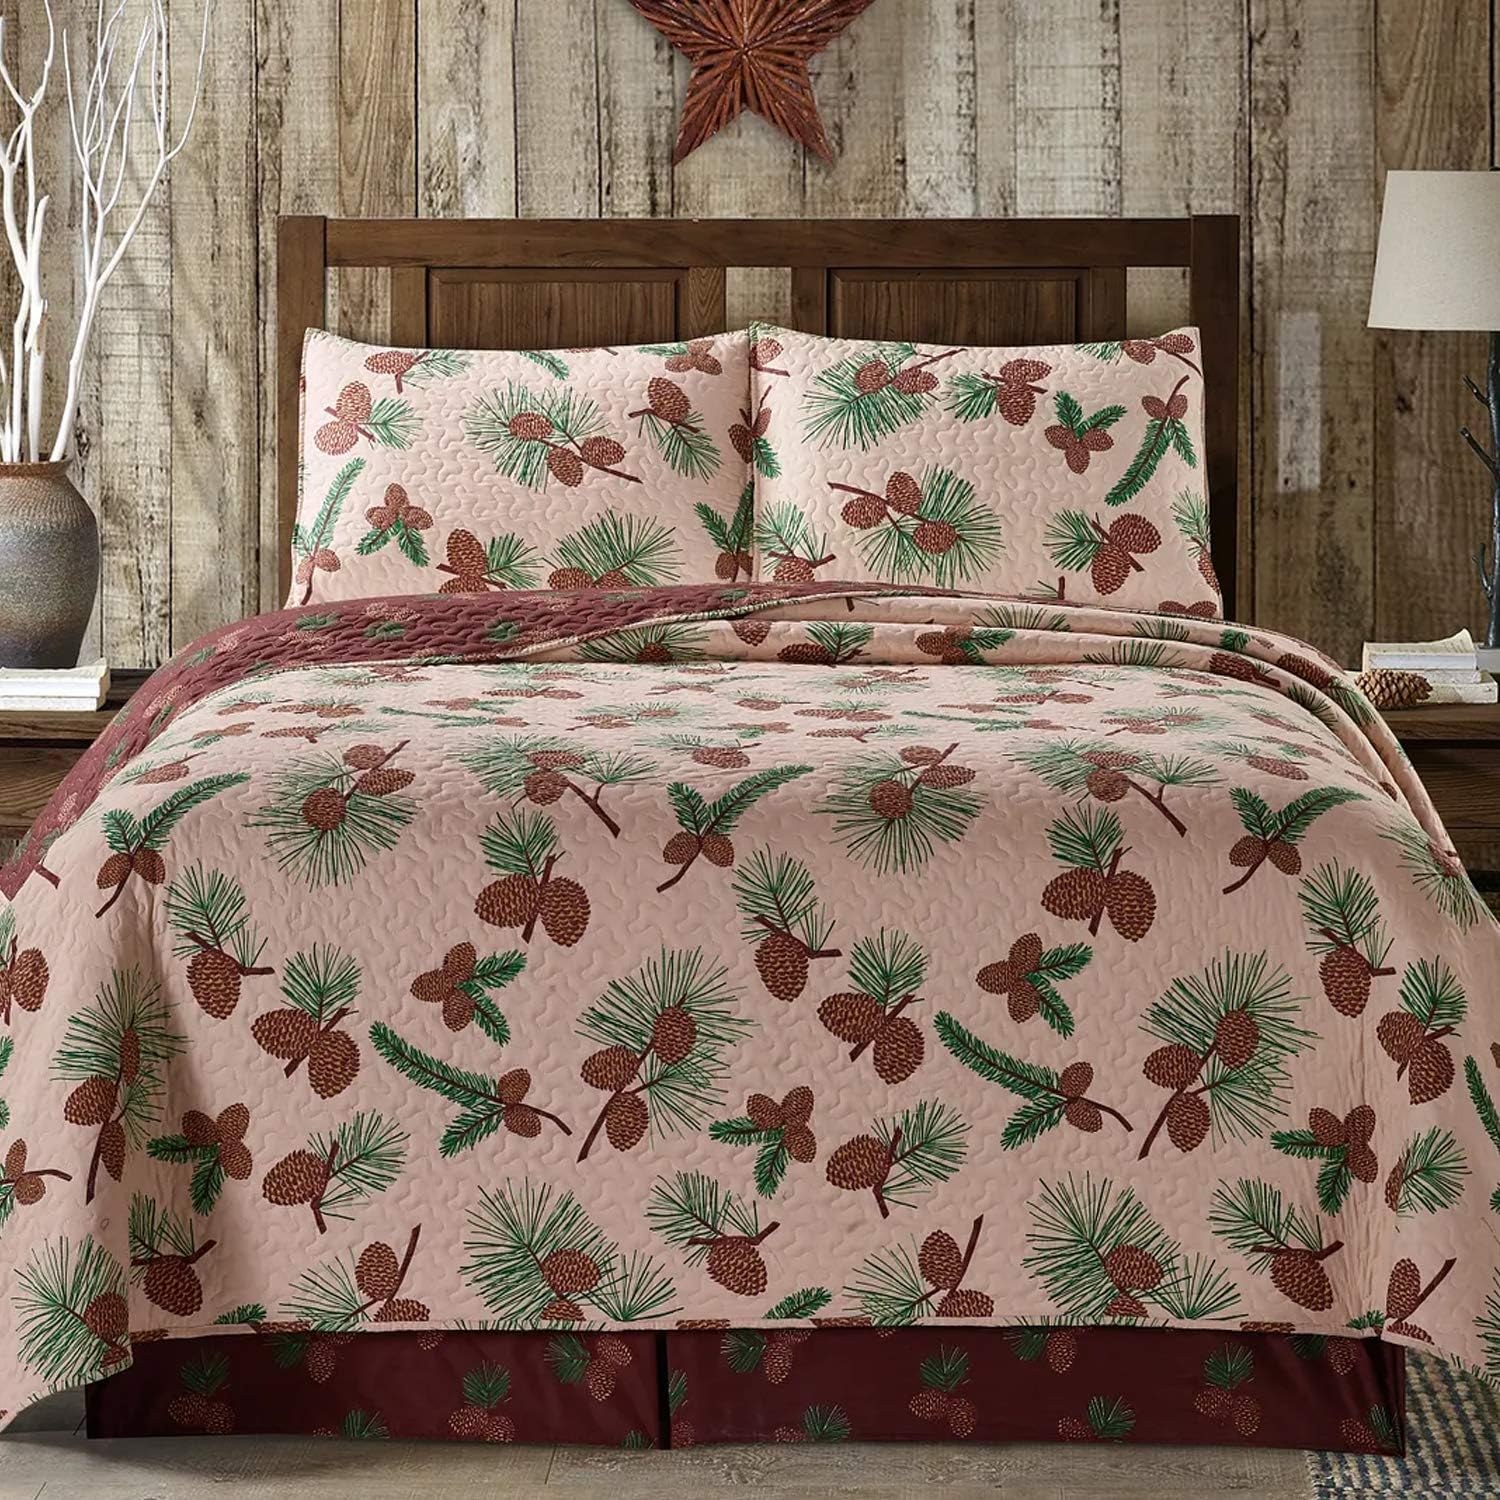 Virah Bella 3 Piece King Cabin Quilt Bedding Set - Forest Pines - Rustic Country Reversible Patchwork Comforter Set with Decorative Pillow Shams